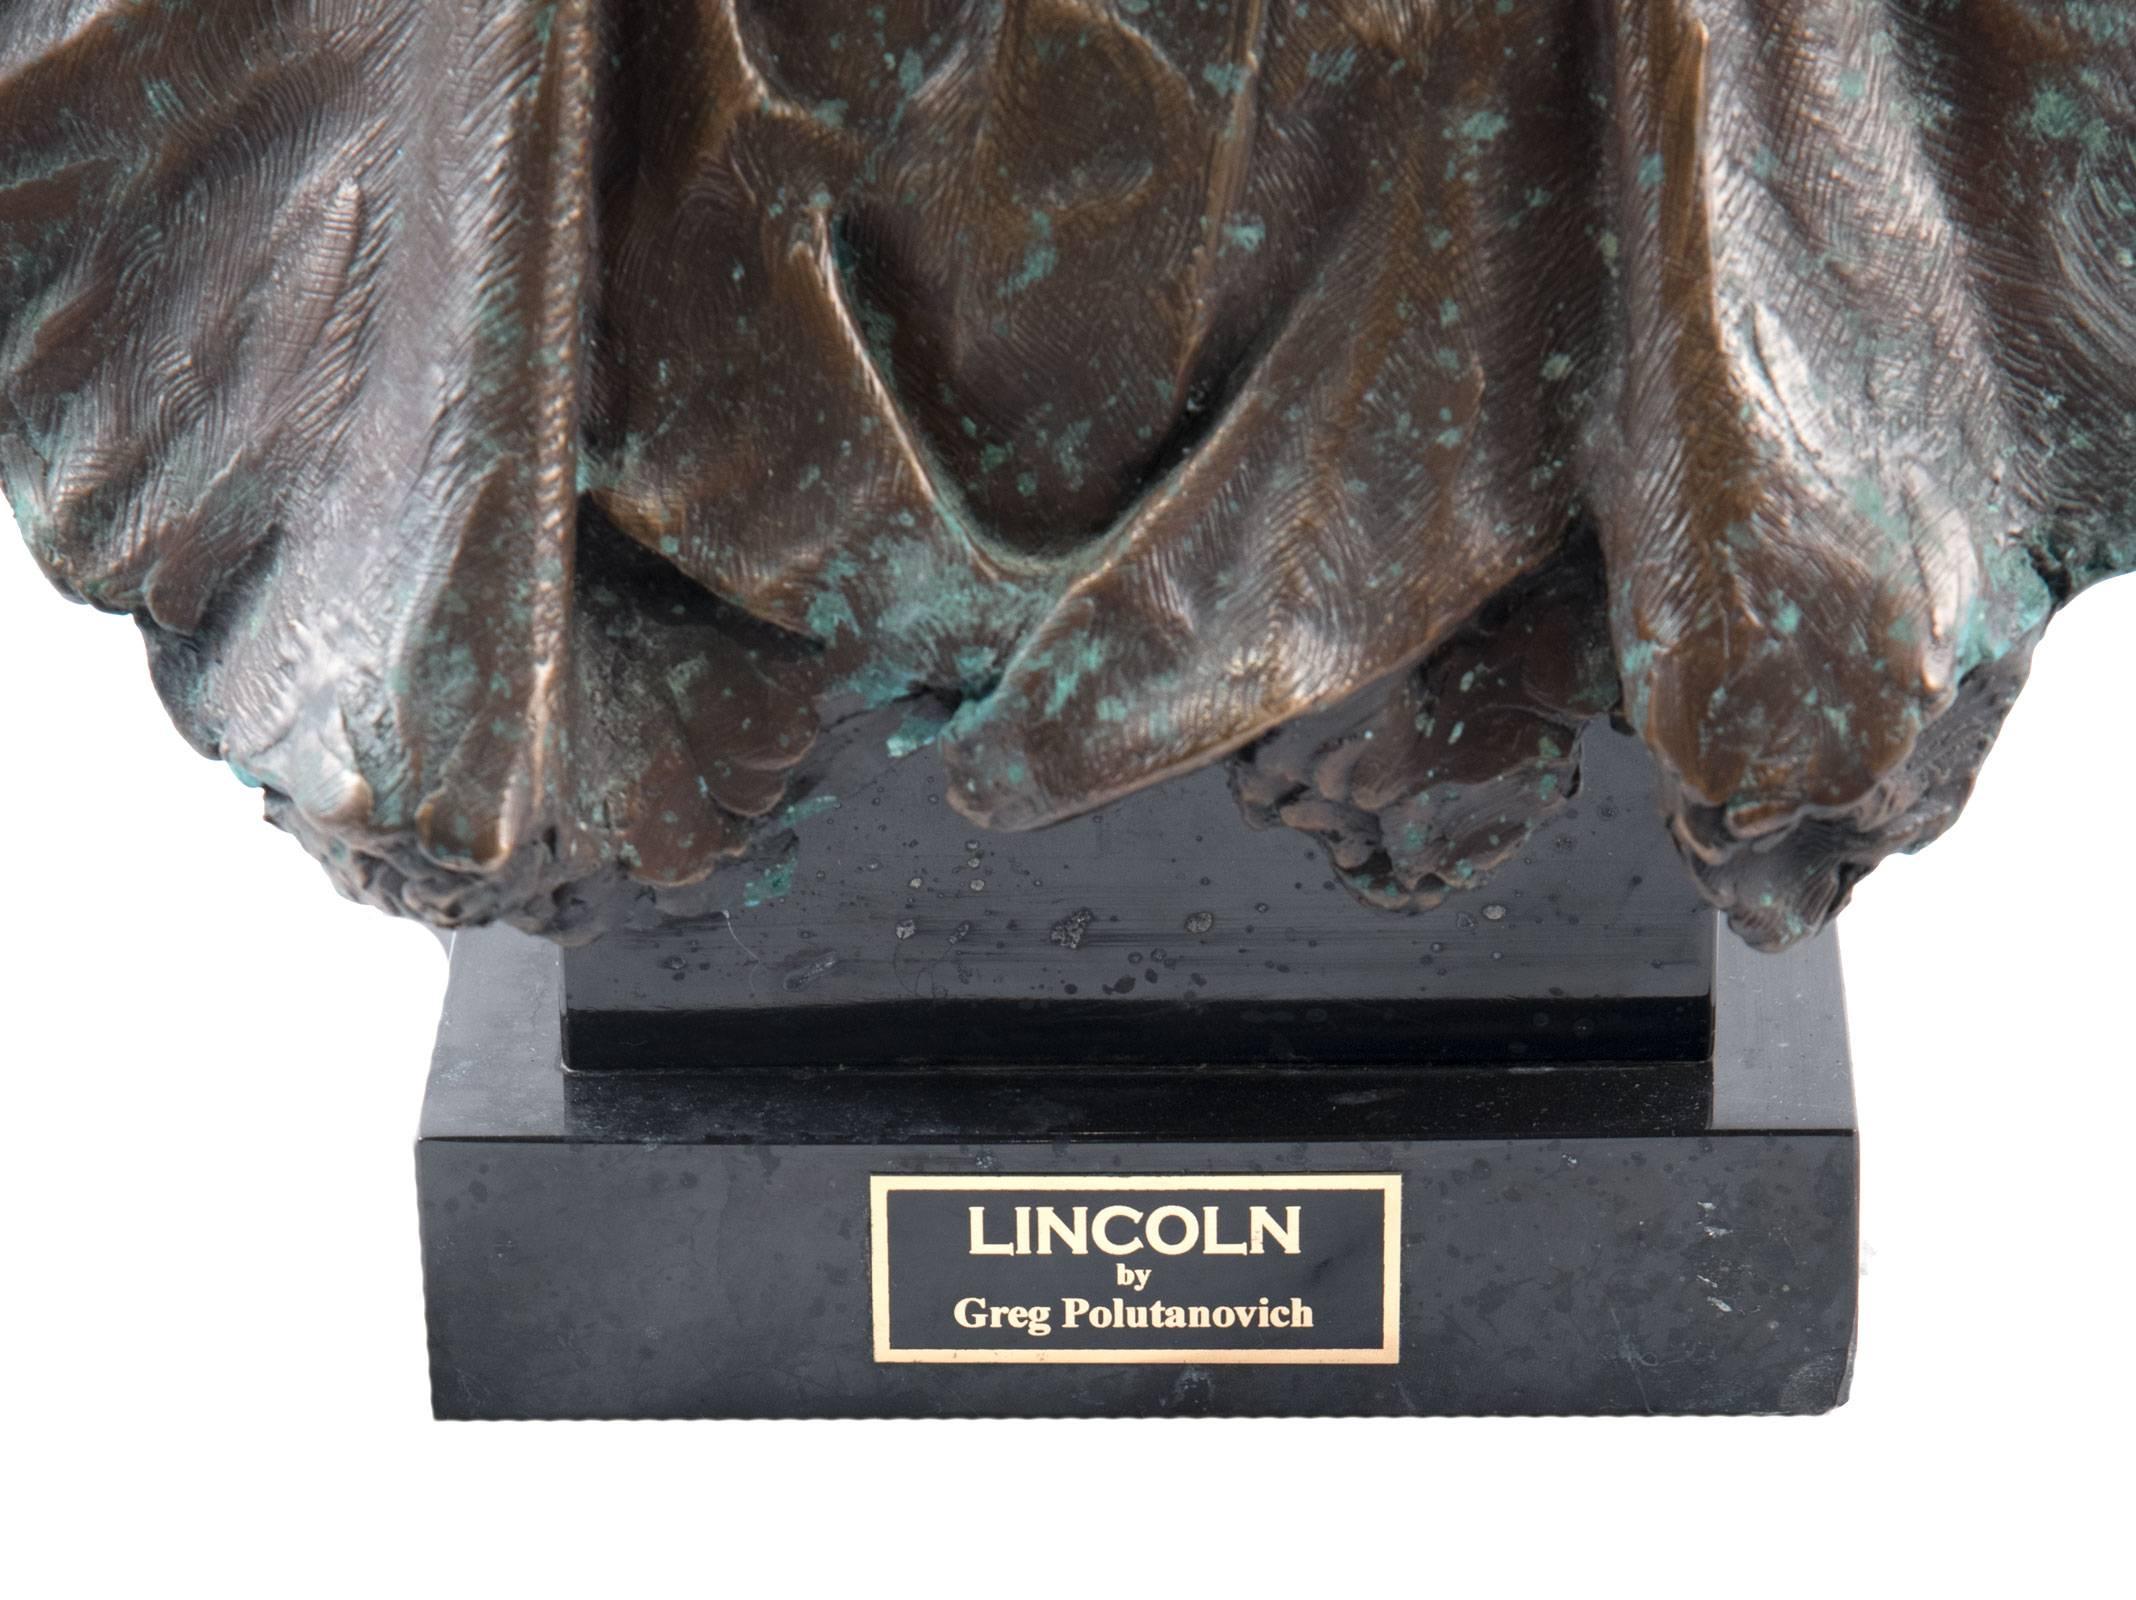 American Classical Bronze Bust of Lincoln by Greg Polutanovich